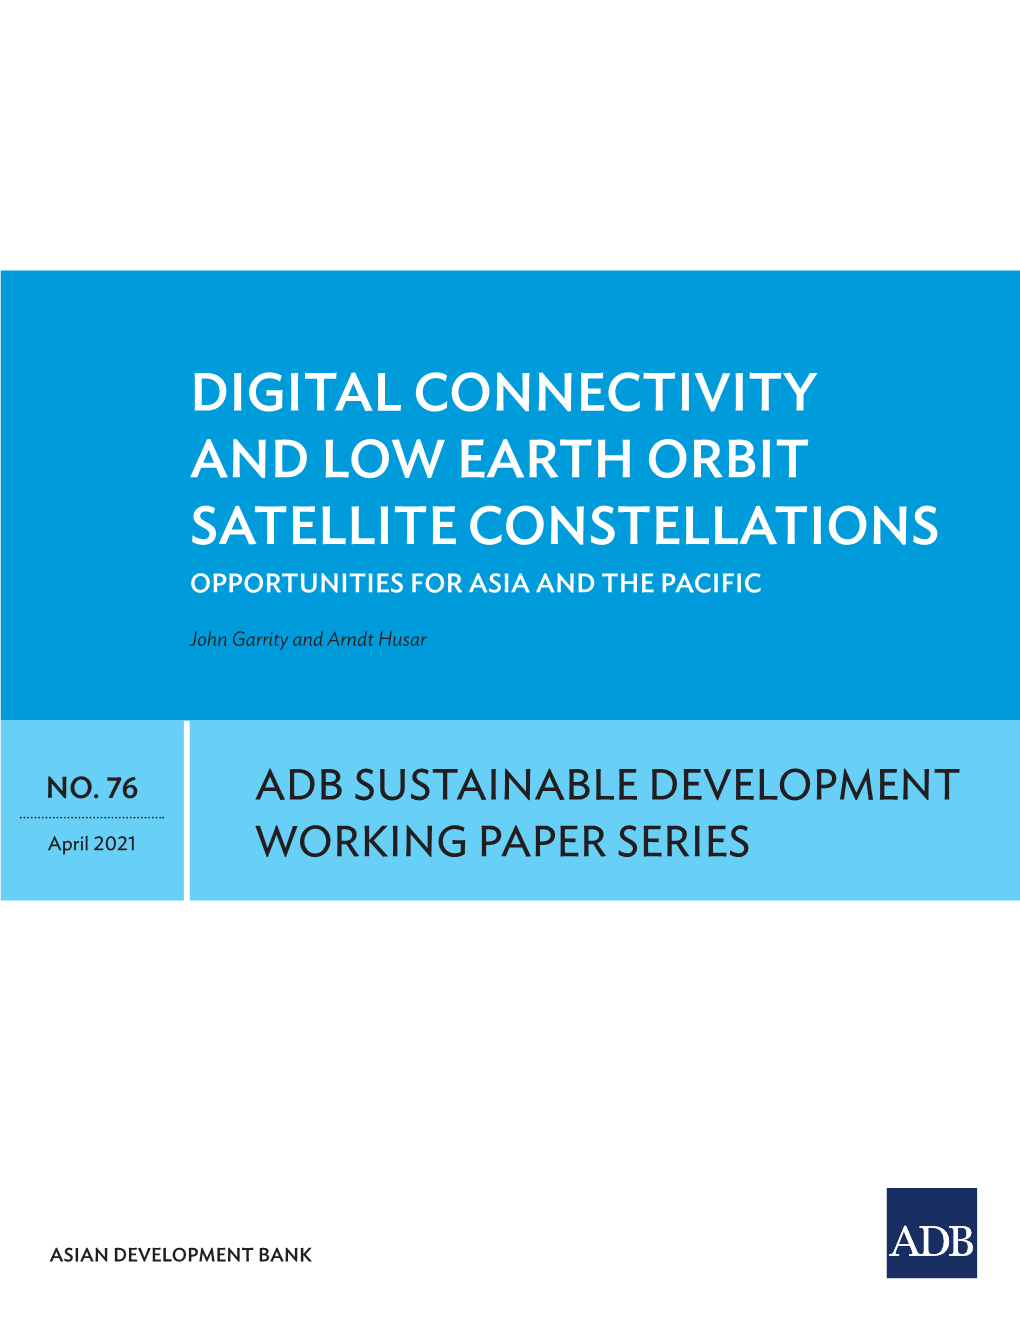 Digital Connectivity and Low Earth Orbit Satellite Constellations Opportunities for Asia and the Pacific